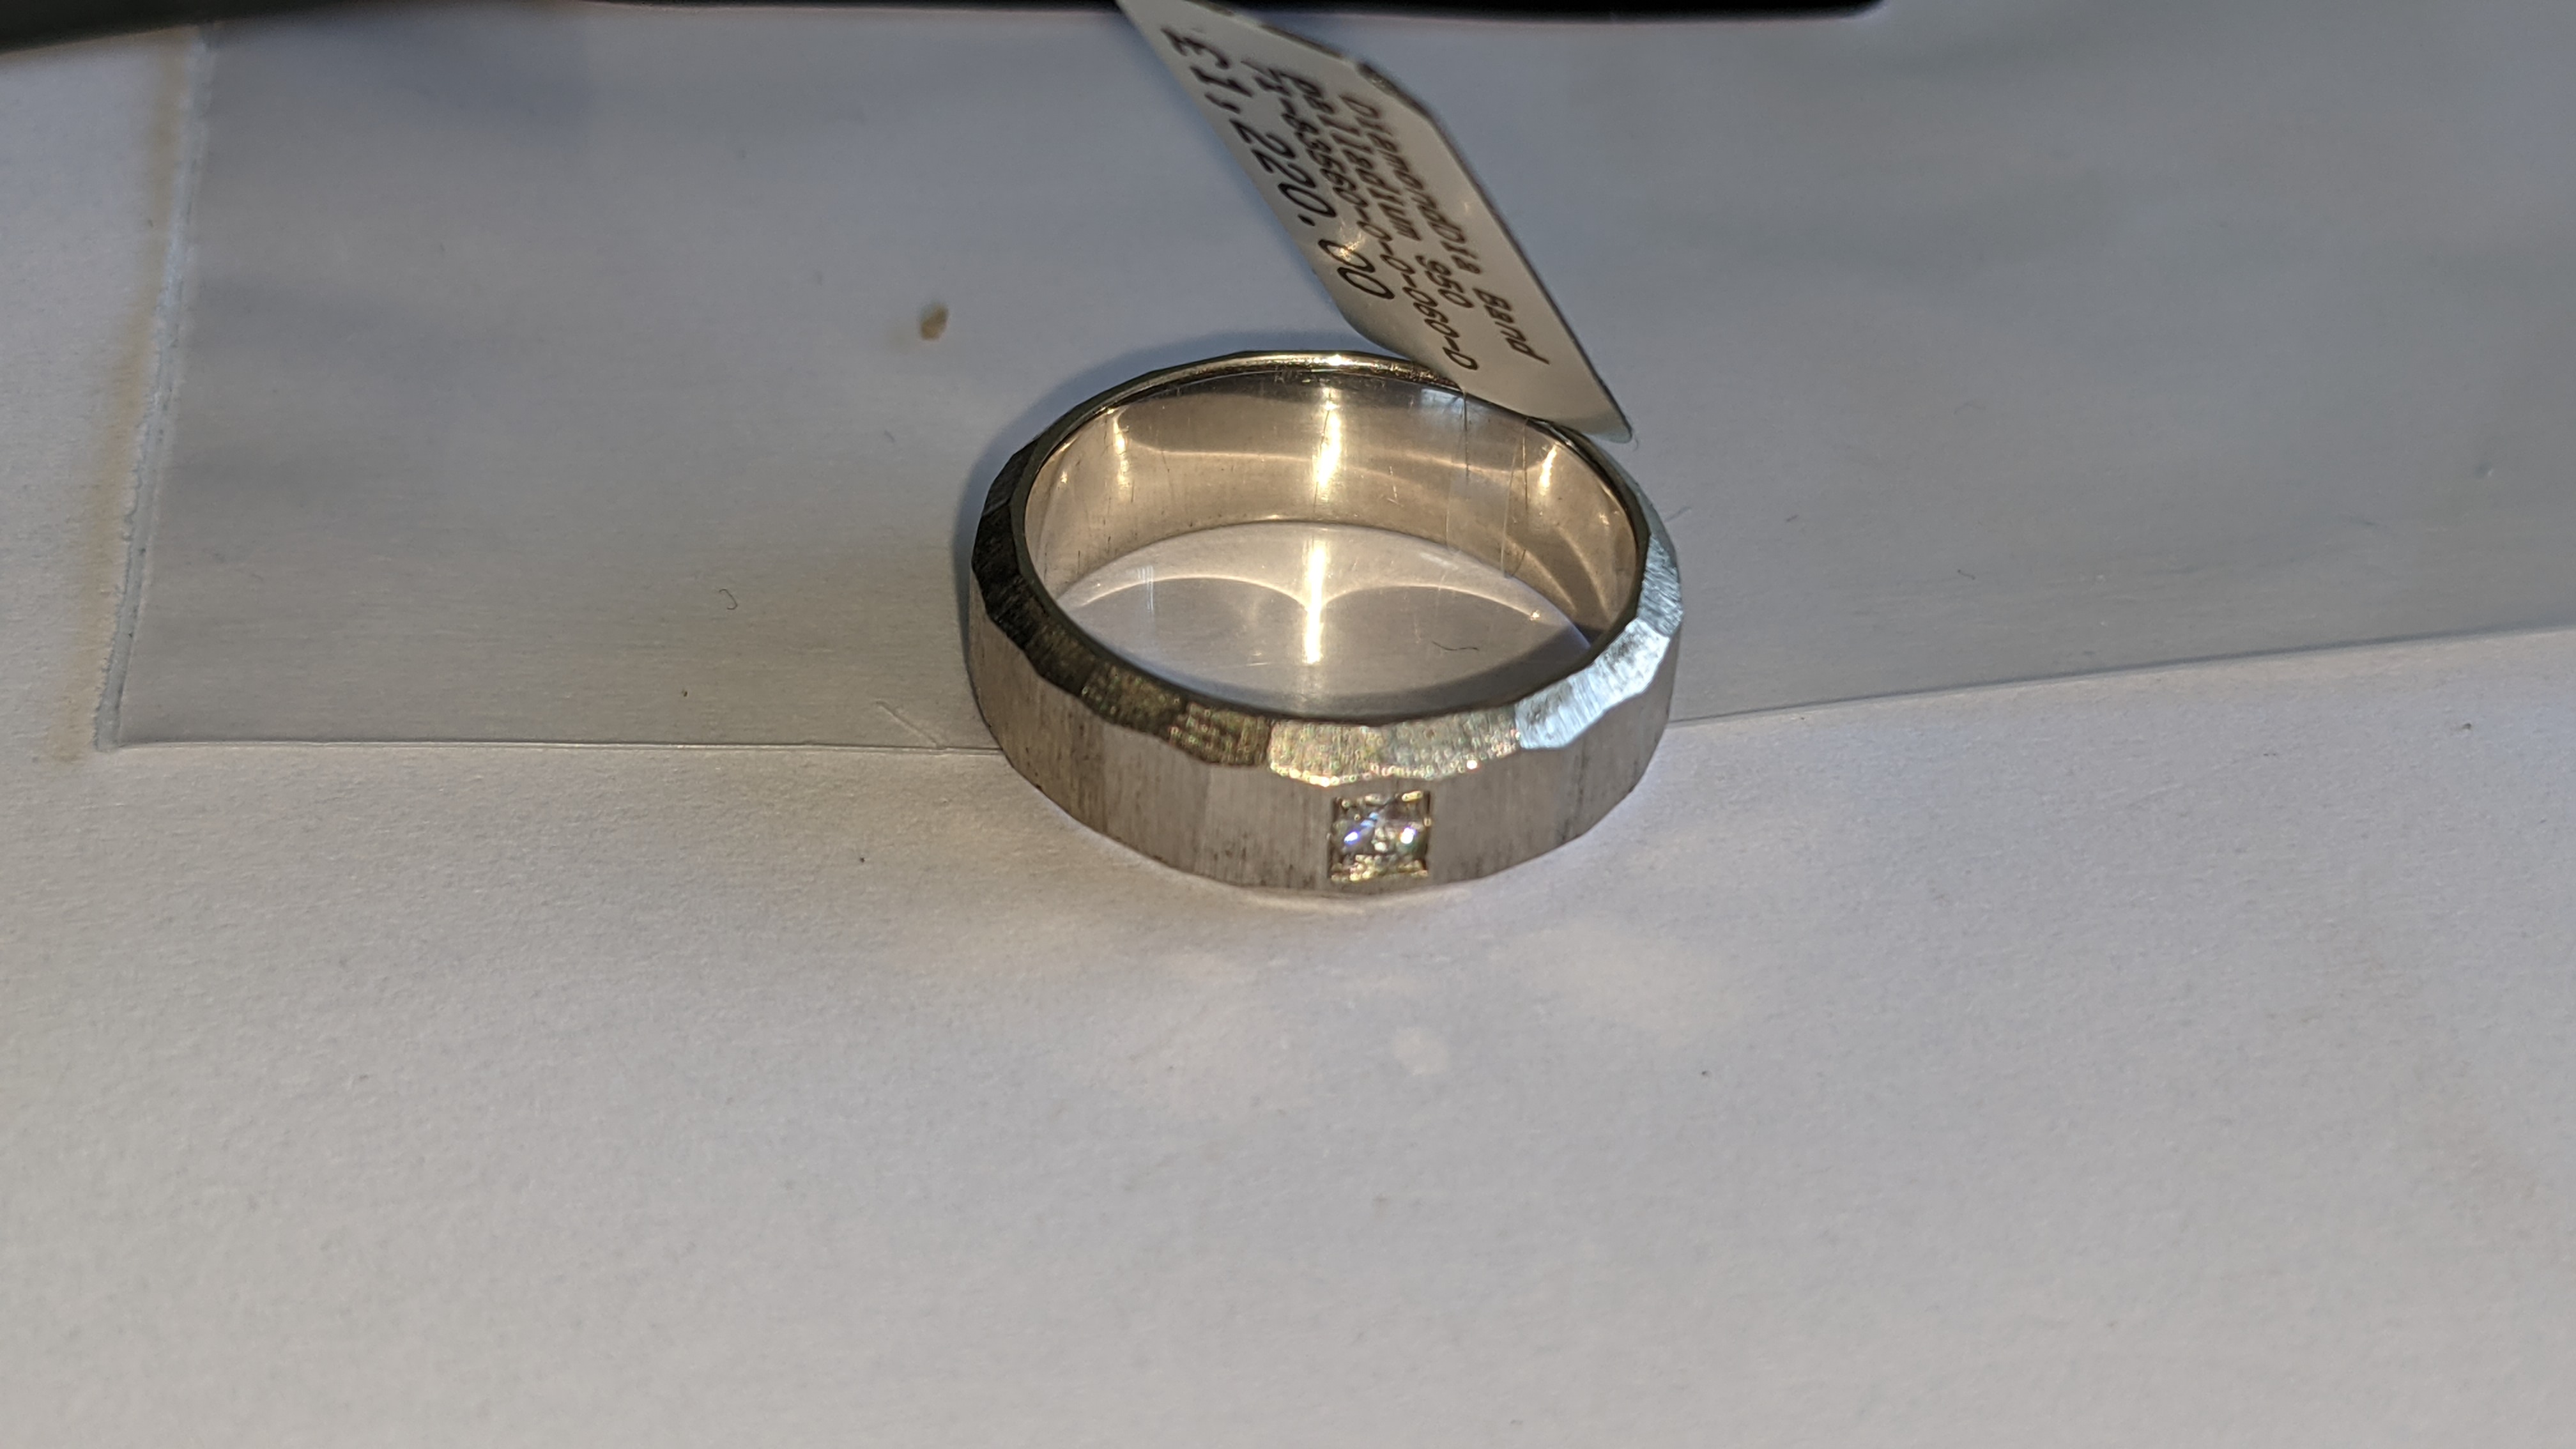 Platinum 950 unusually faceted Palladium 950 ring with single diamond weighing 0.05ct. RRP £1,220 - Image 3 of 15